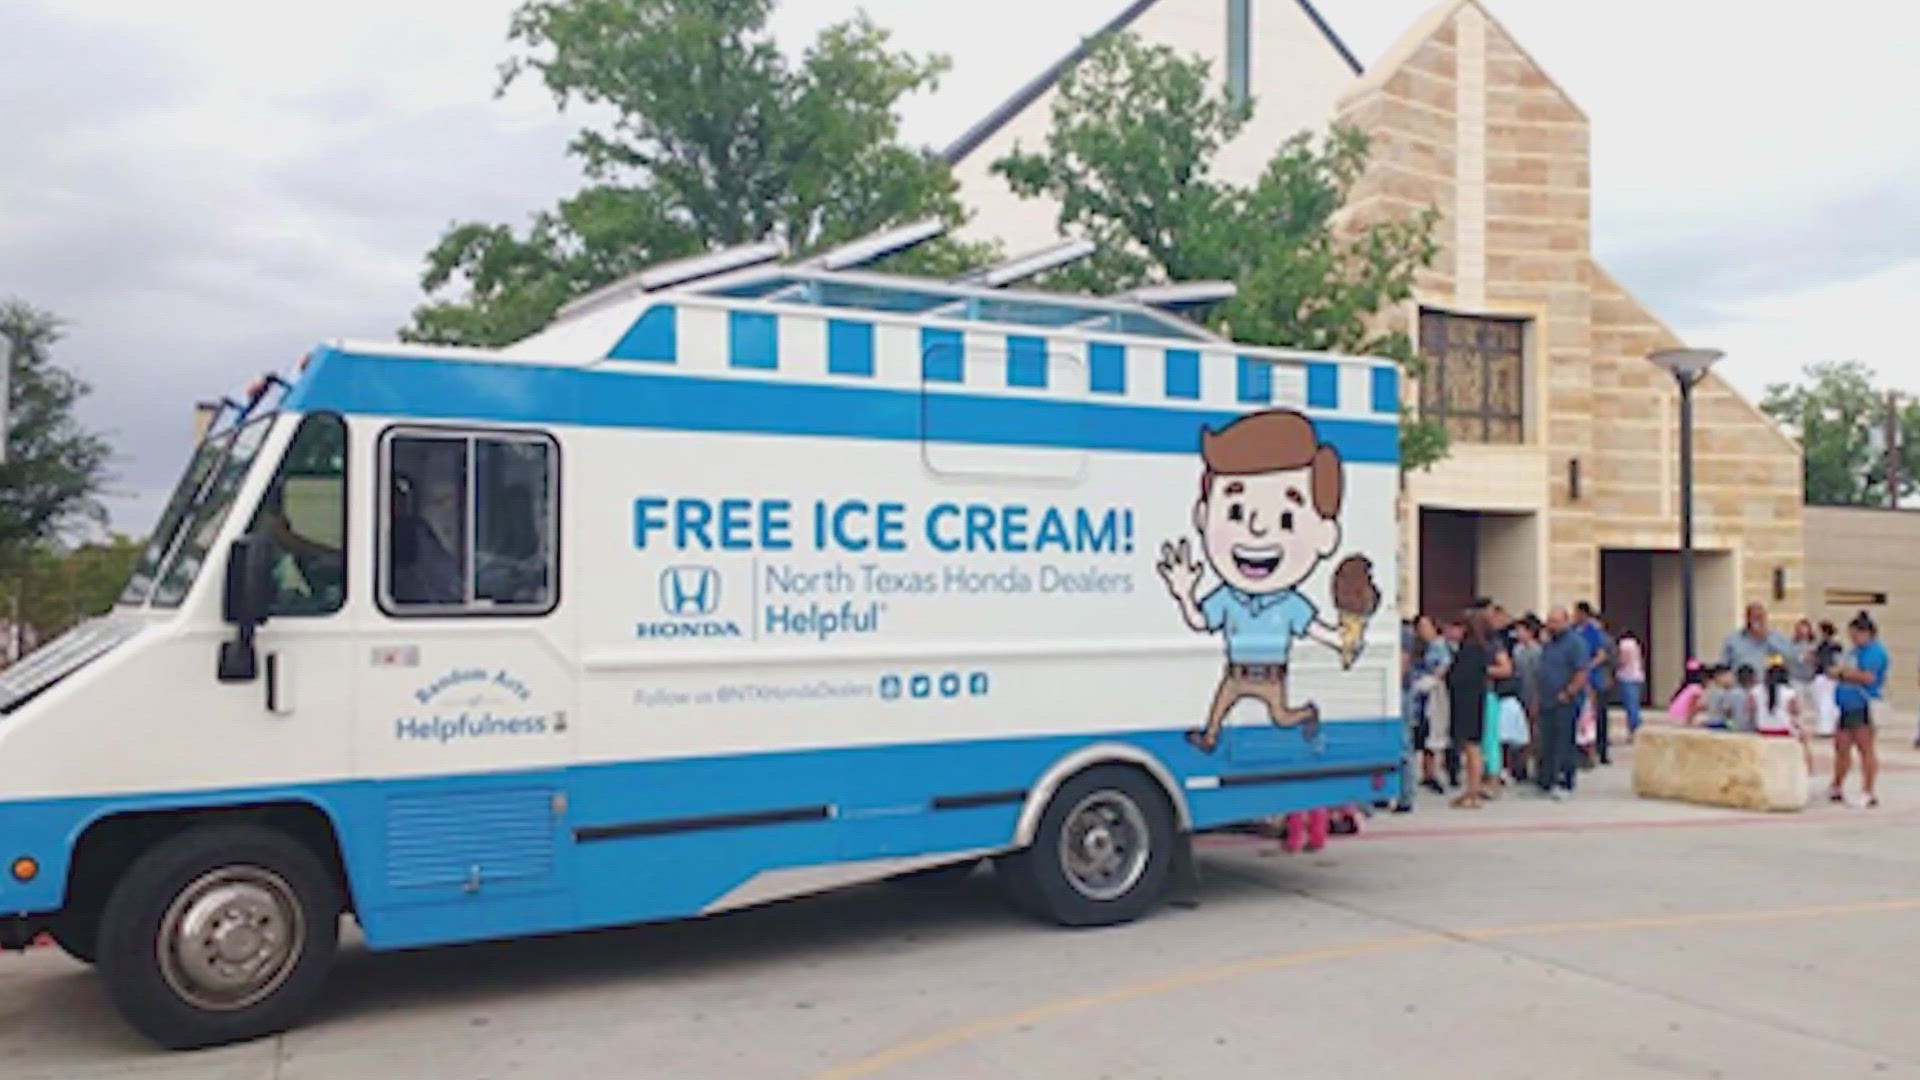 Dealers will give out free ice cream between Wednesday, Aug. 2, to Saturday, Aug. 5.